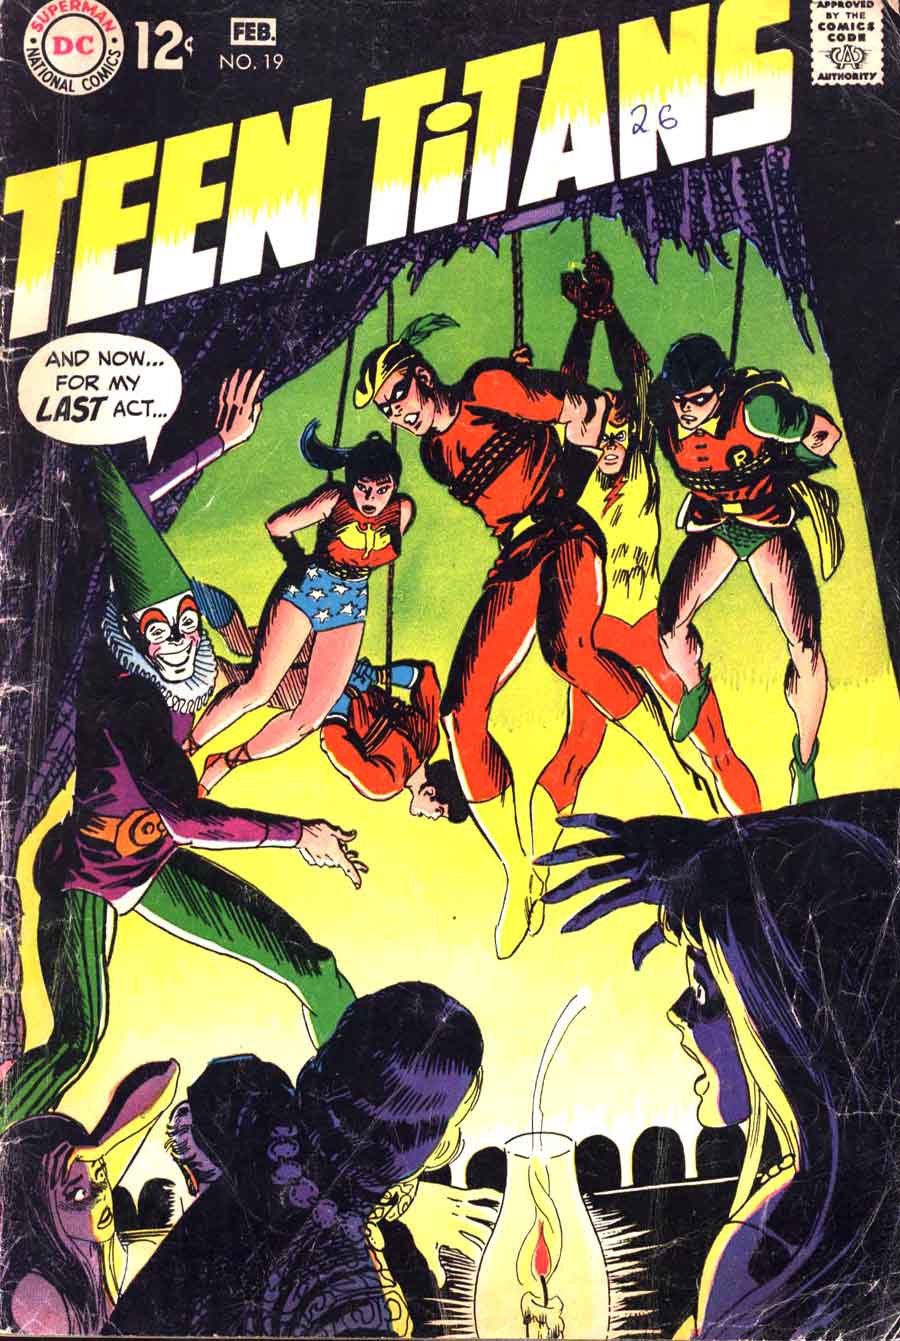 Teen Titans v1 #19 dc comic book cover art by Nick Cardy